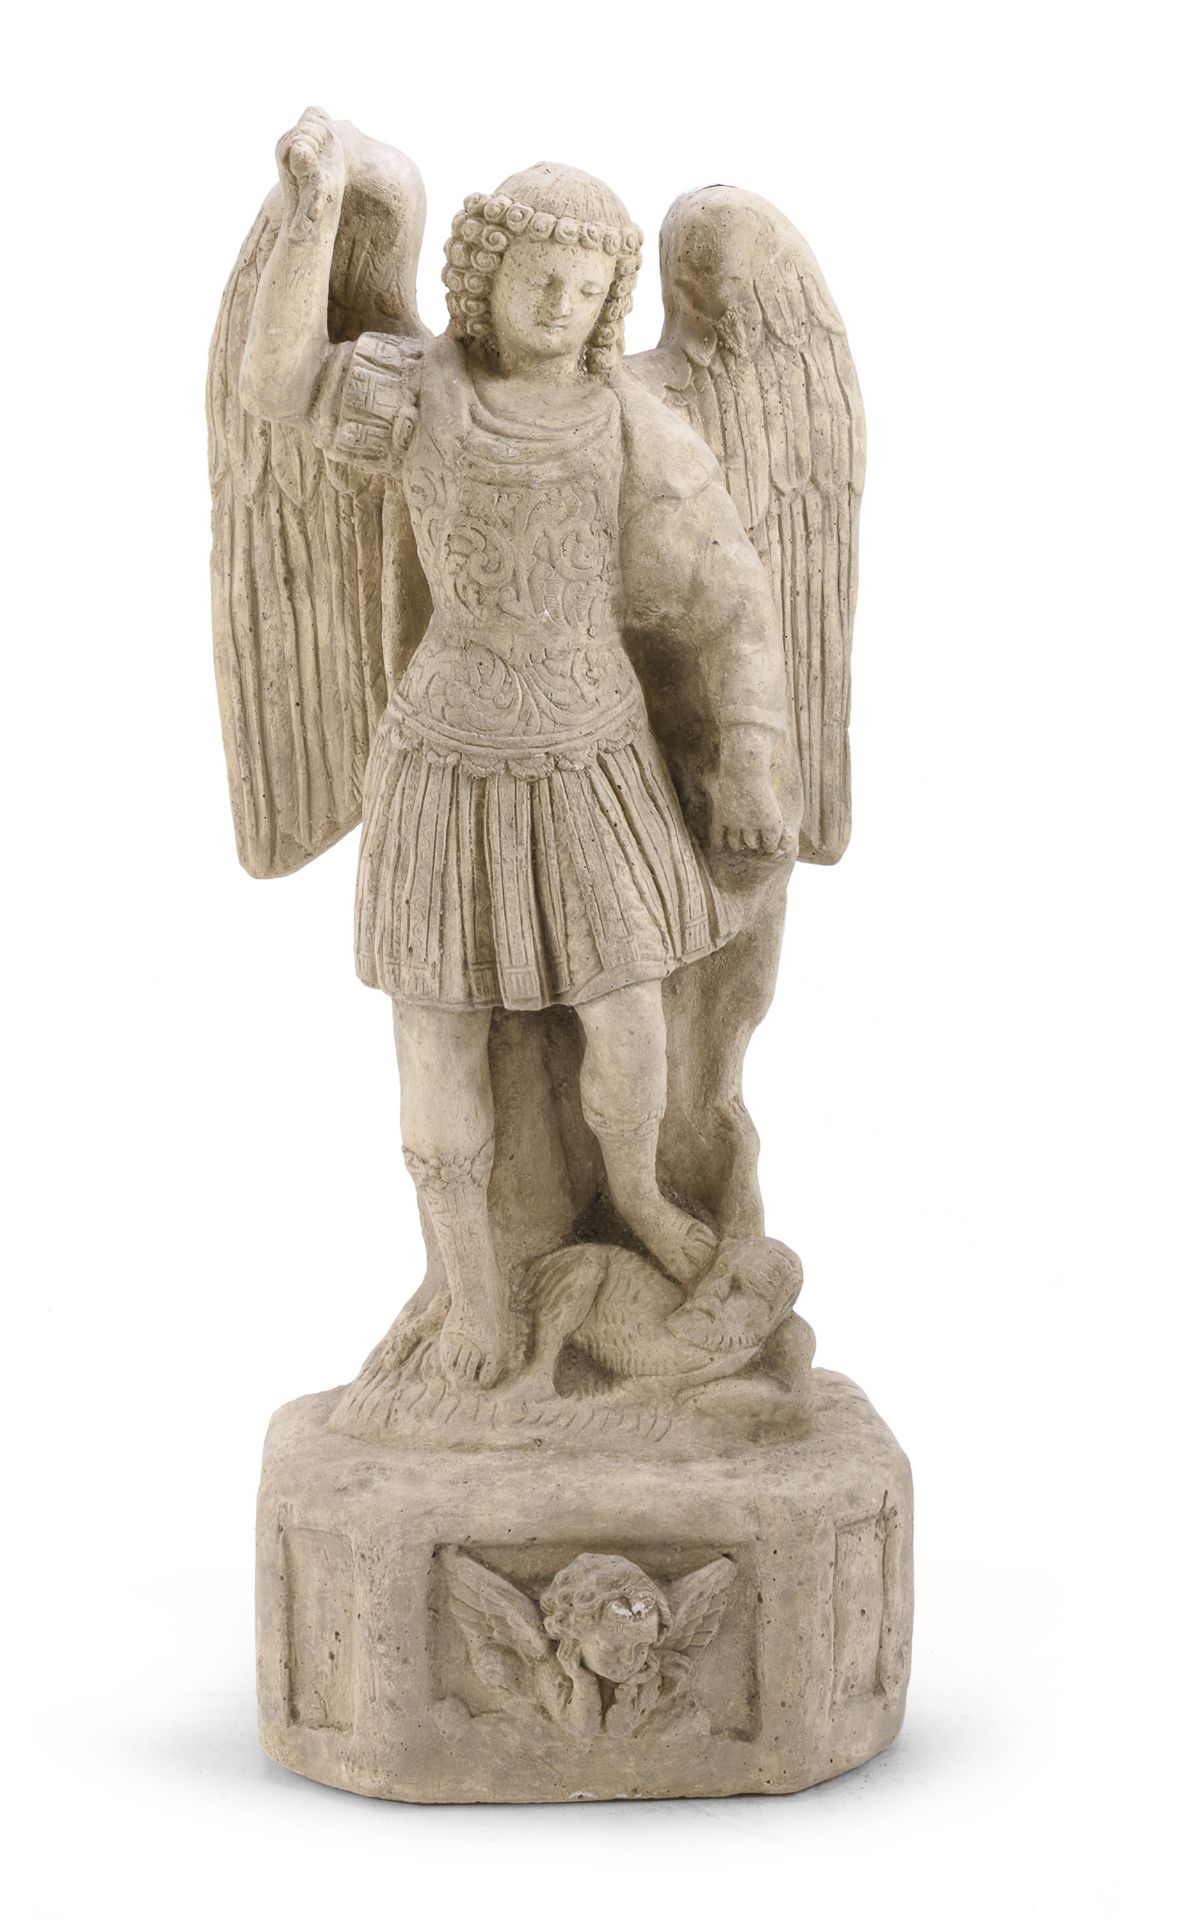 STONE SCULPTURE OF ST MICHAEL LATE 19TH CENTURY